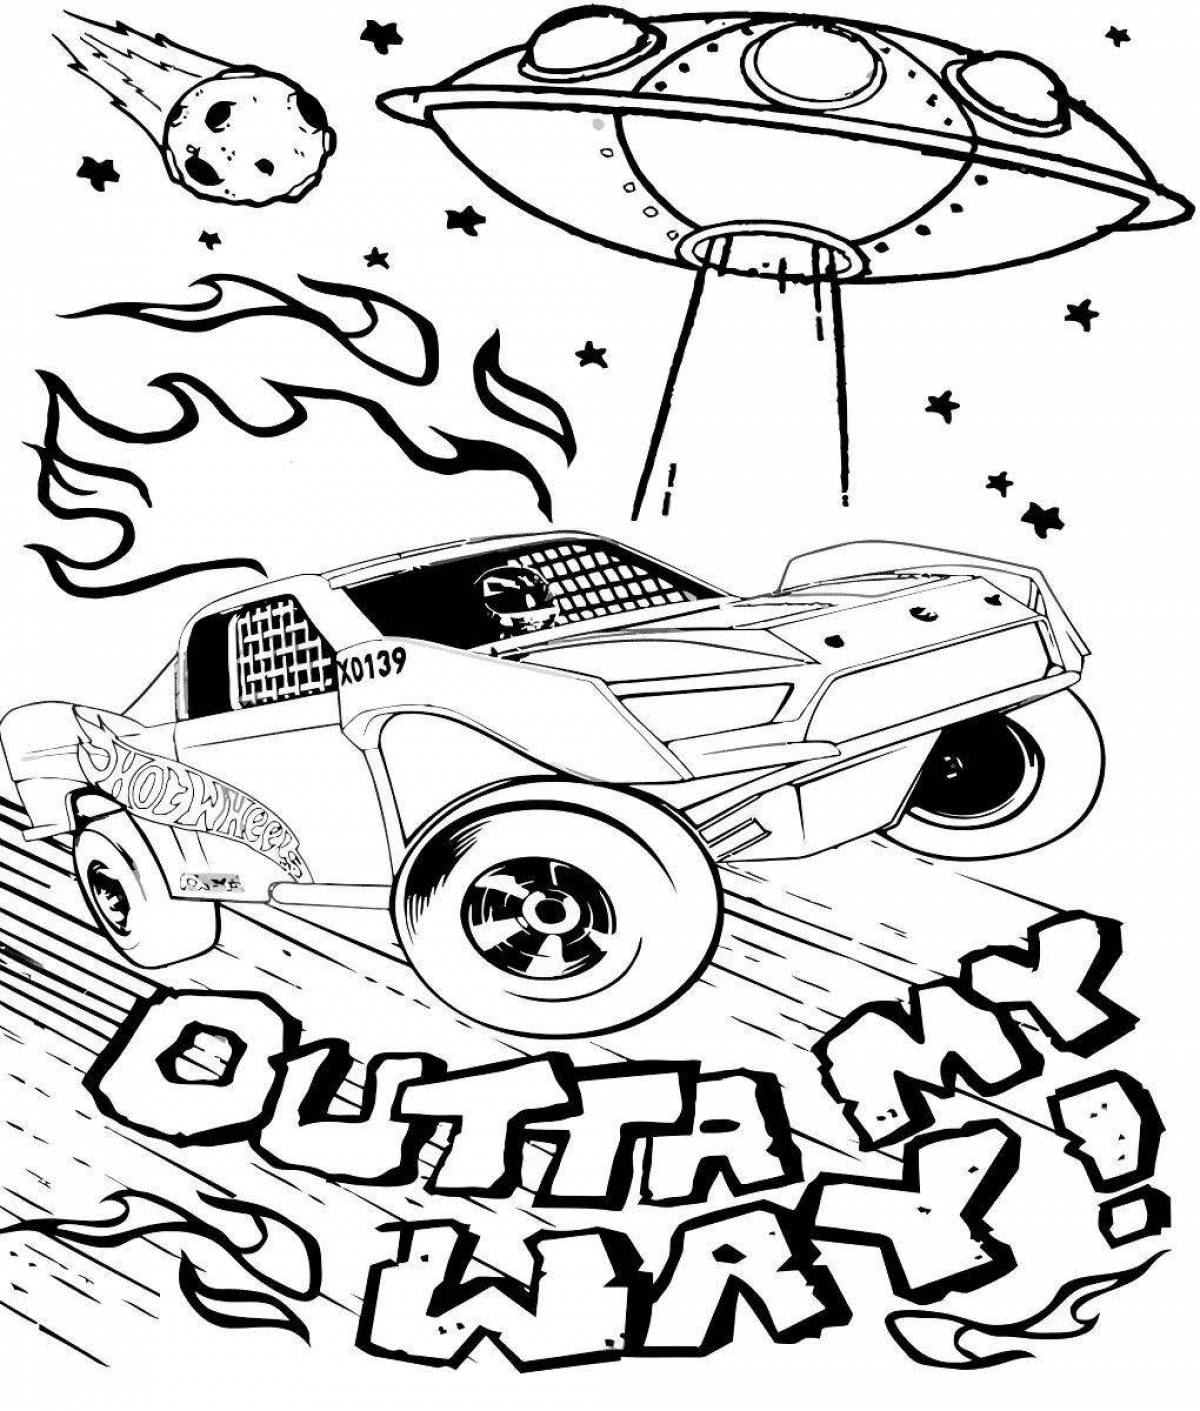 Great hot wheels coloring book for boys